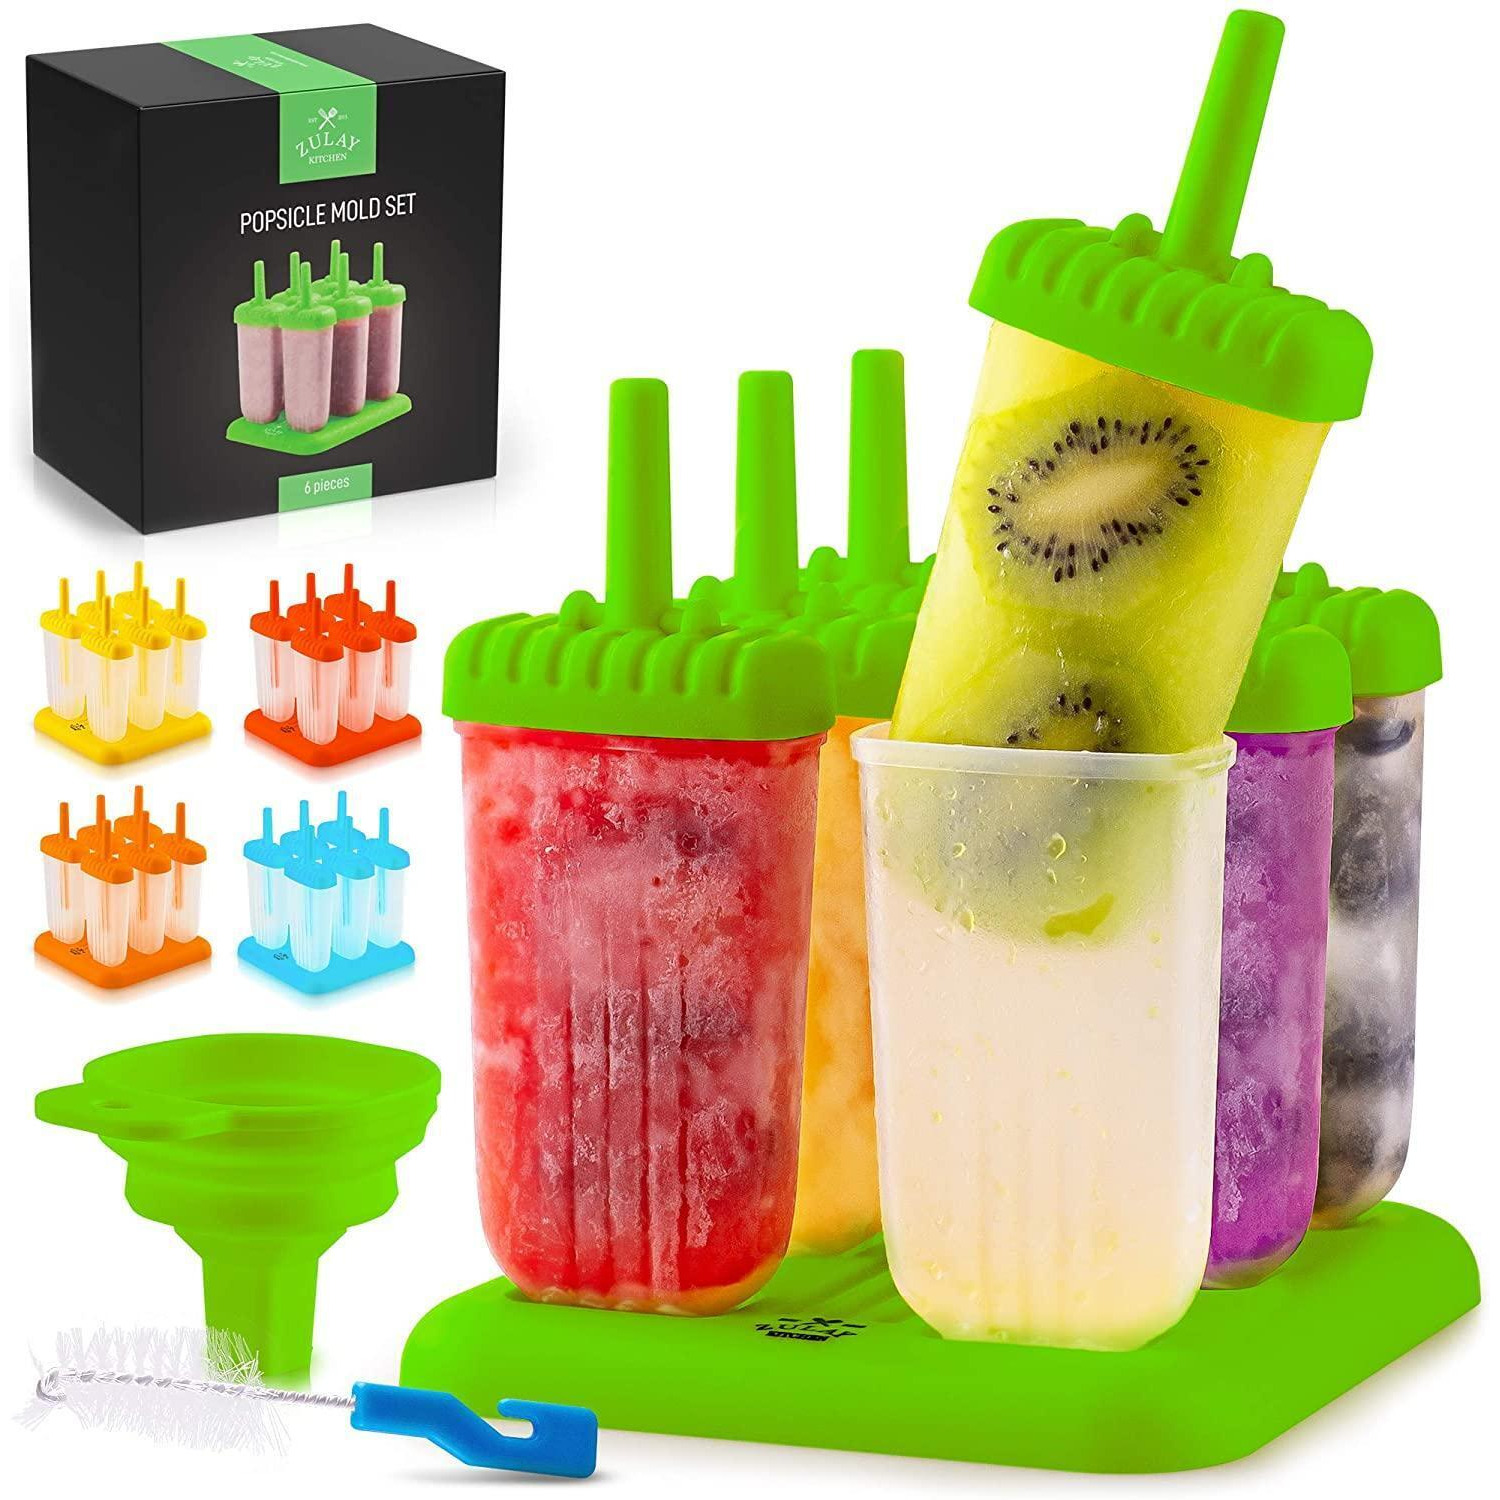 Zulay Kitchen Popsicle Molds Set of 6 - BPA Free Reusable Molds With Drip Guard, Tray, Silicone Funnel & Cleaning Brush